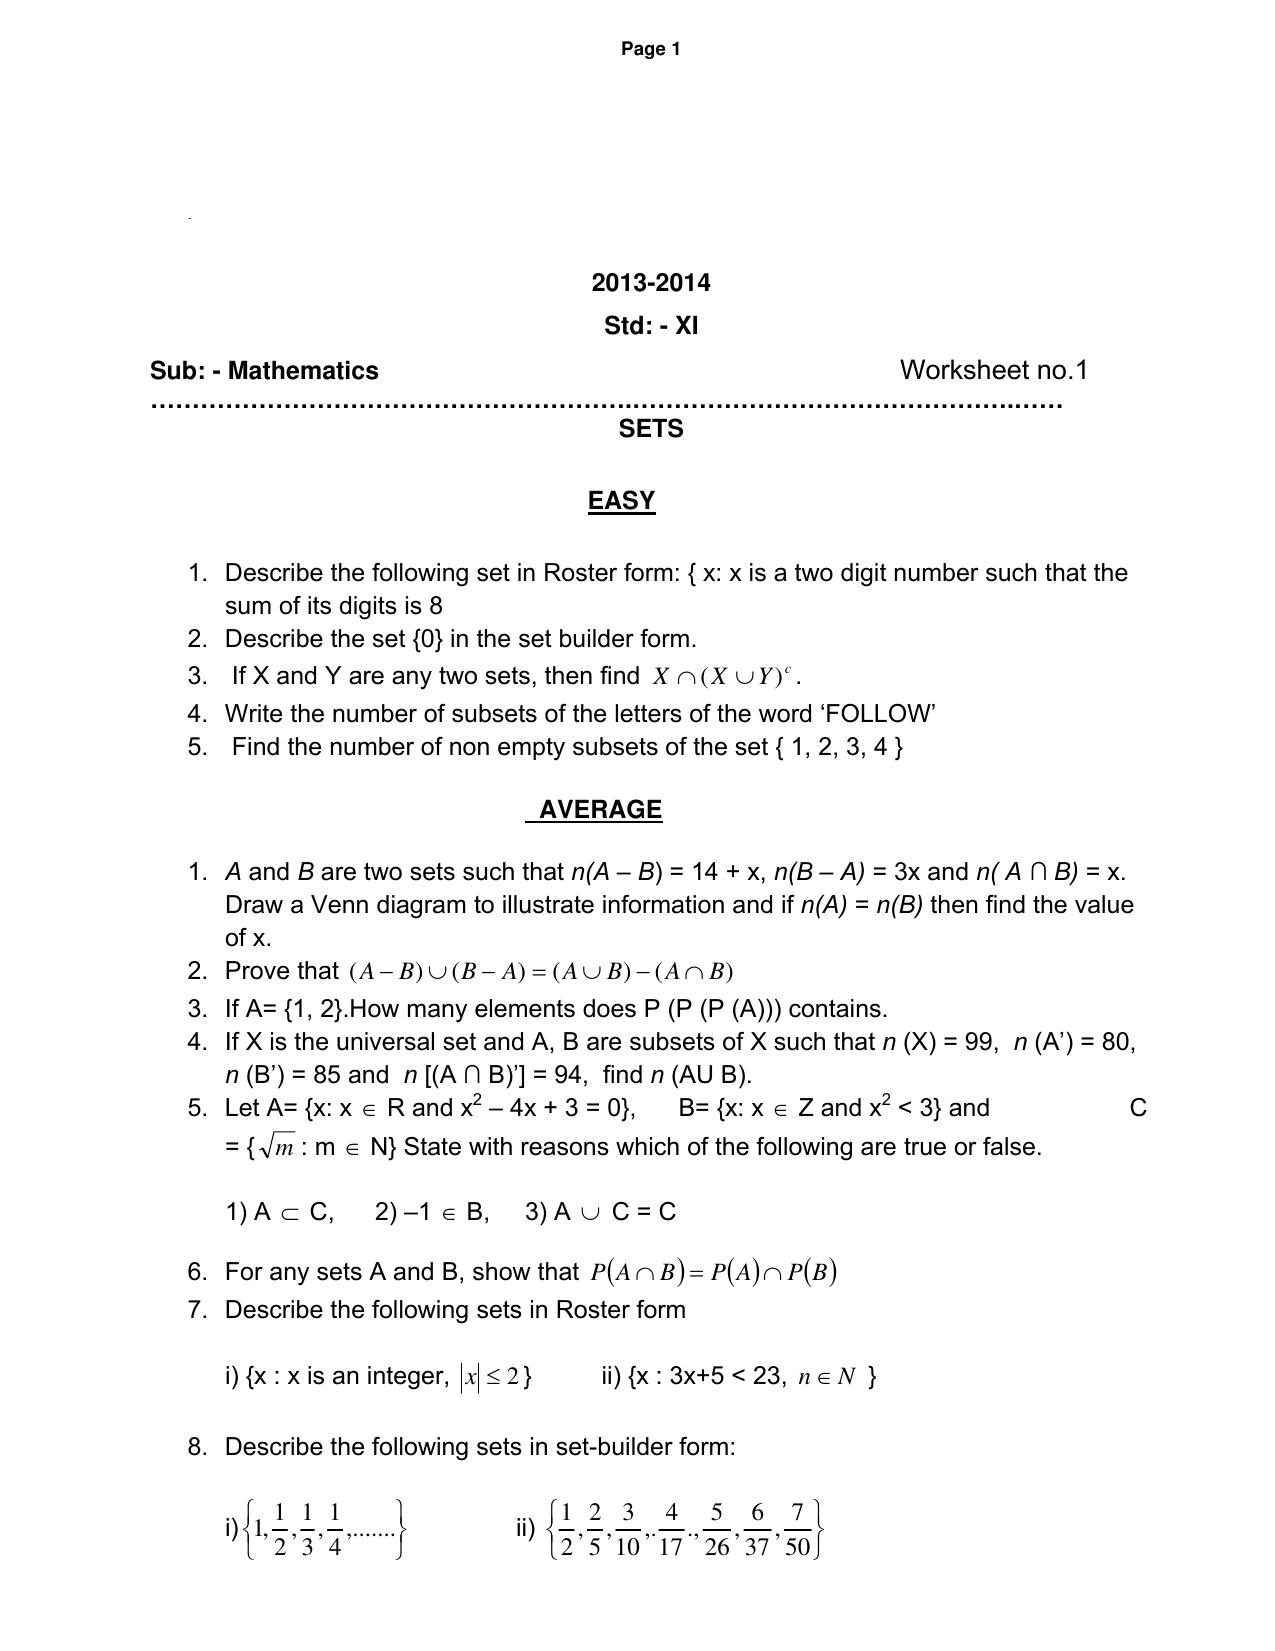 CBSE Worksheets for Class 11 Mathematics Mathematical Reasoning Assignment - Page 1